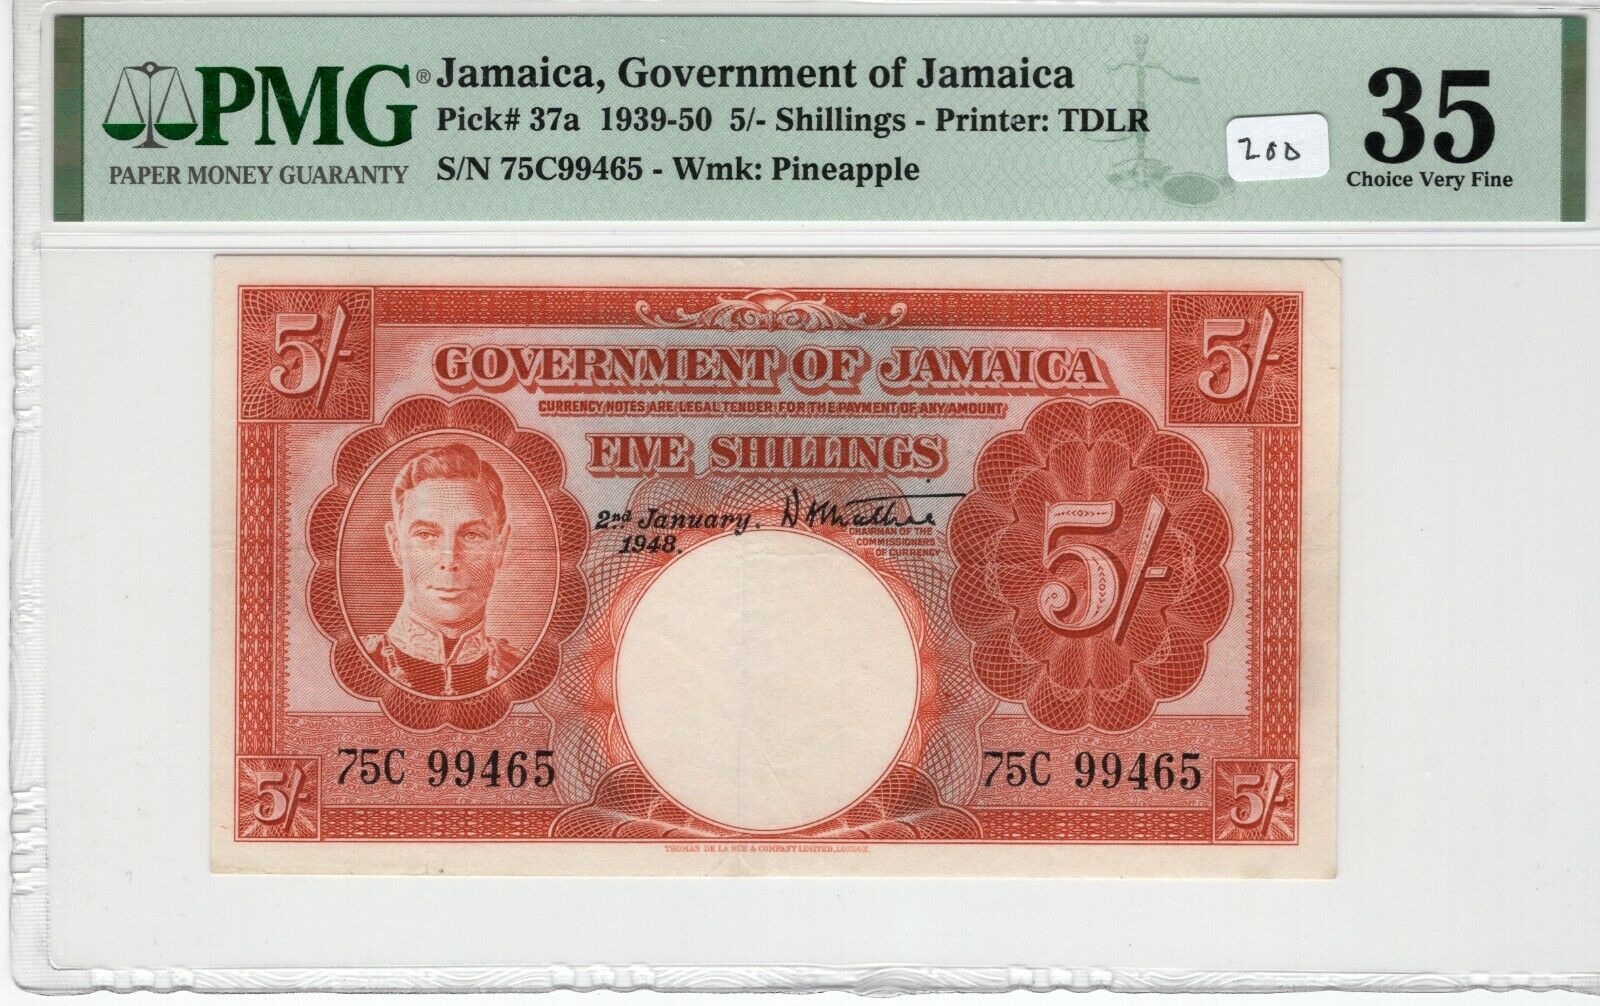 Jamaica 1948 5 Shillings Pmg Certified Banknote Choice Very Fine 35 Pick 37a